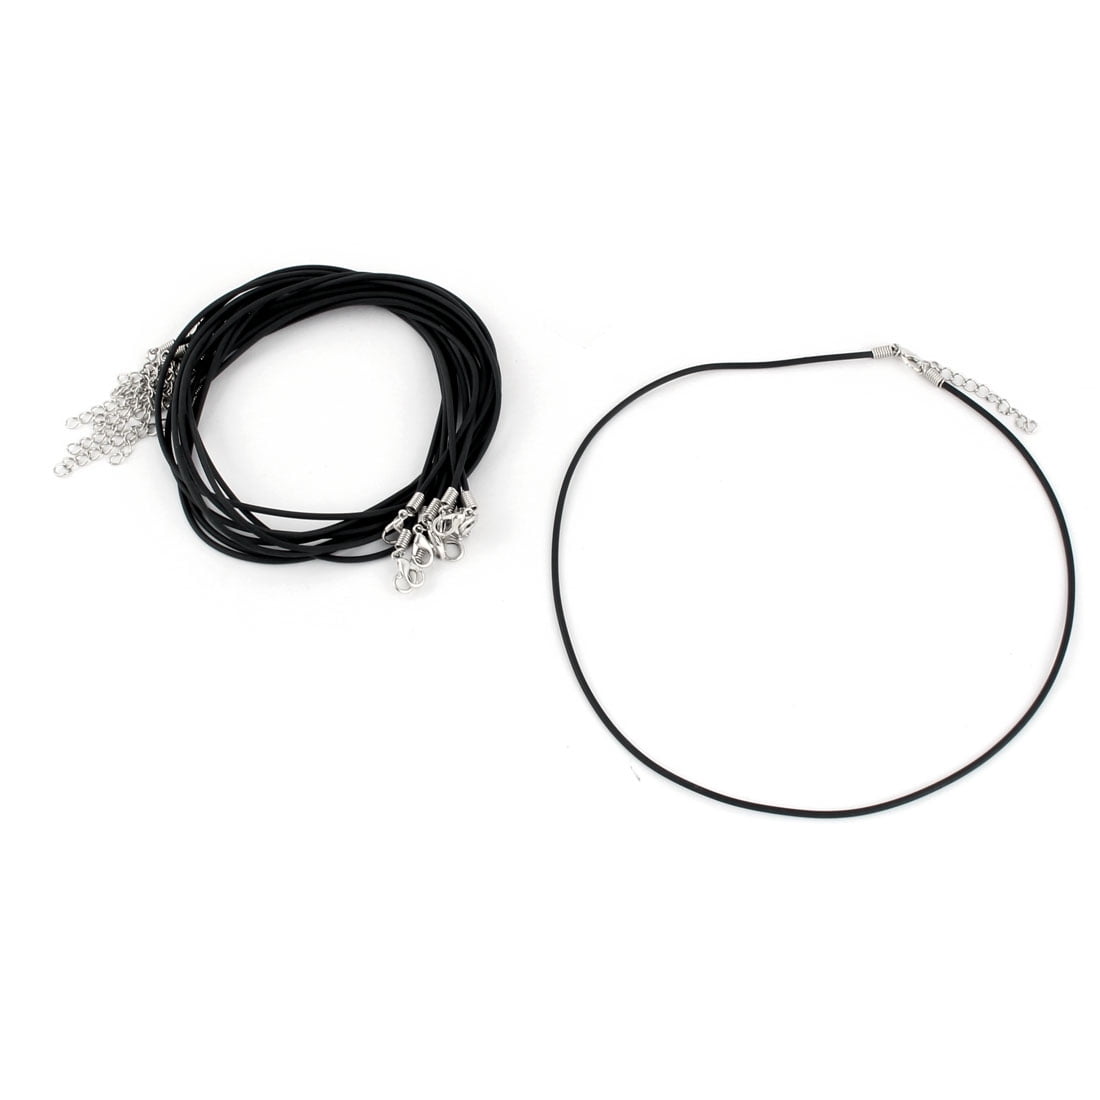 10pcs black real leather necklace cords lobster clasp # 